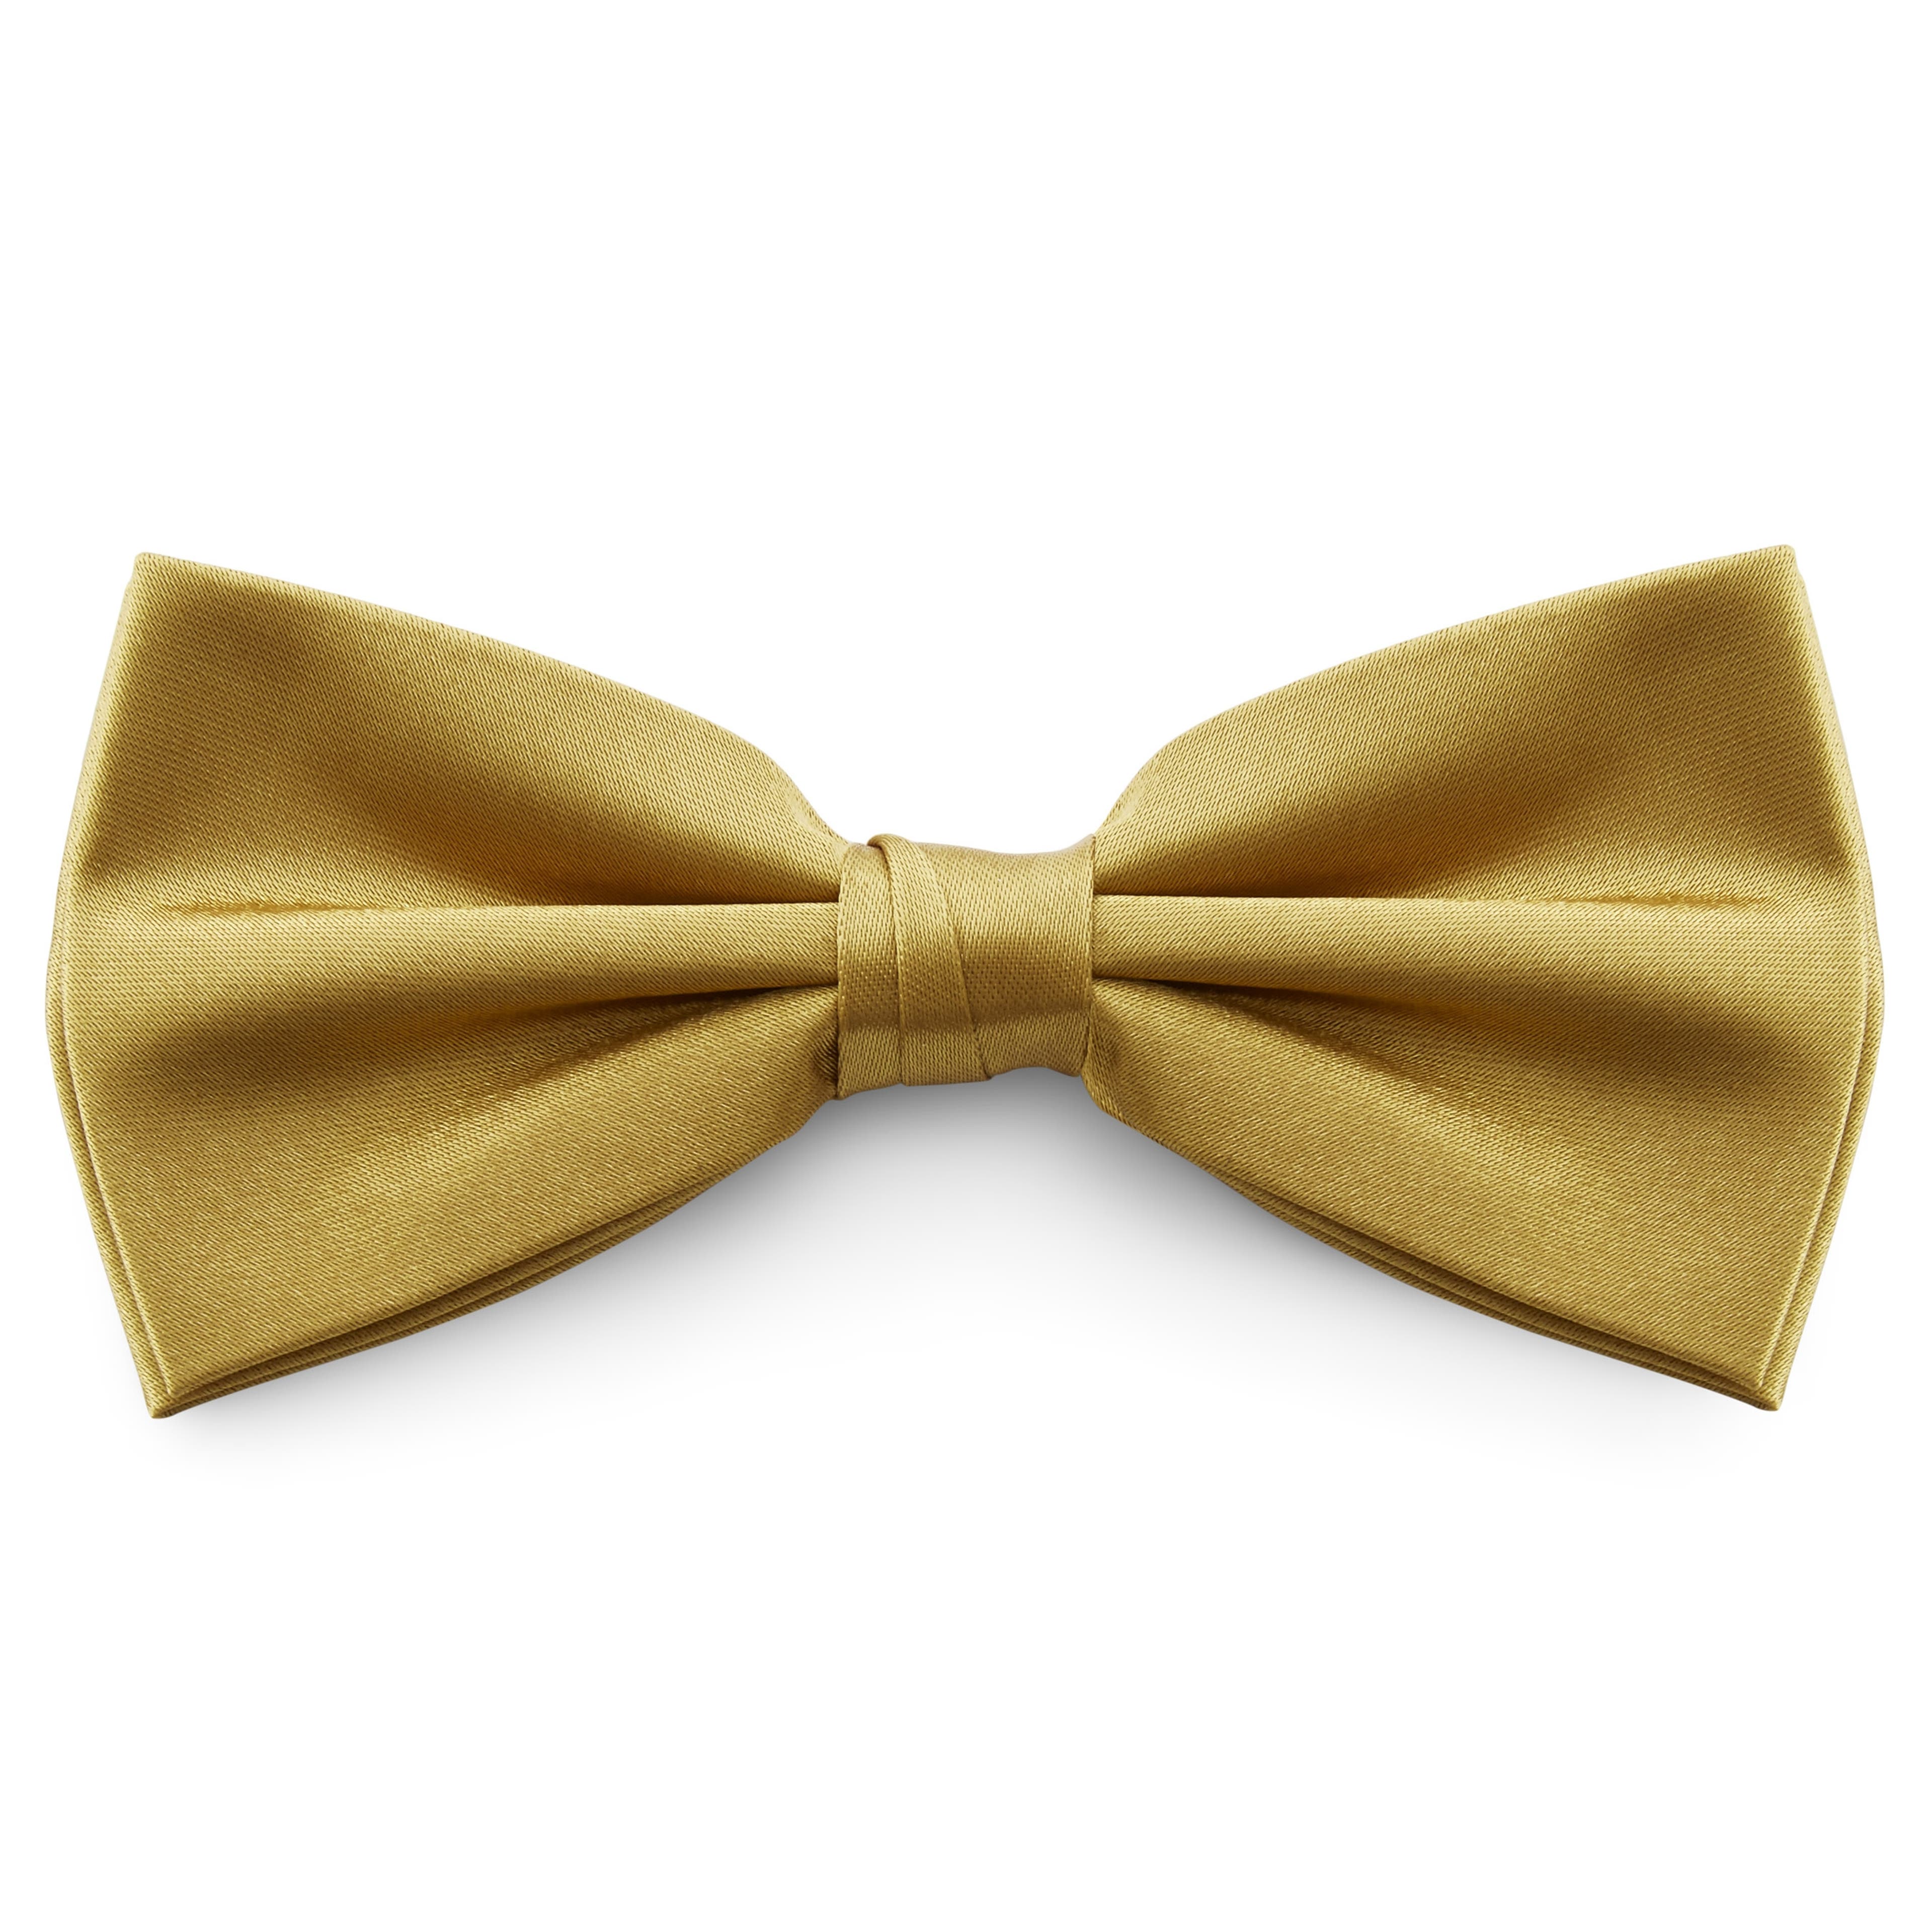 Shiny Gold Basic Pre-Tied Bow Tie